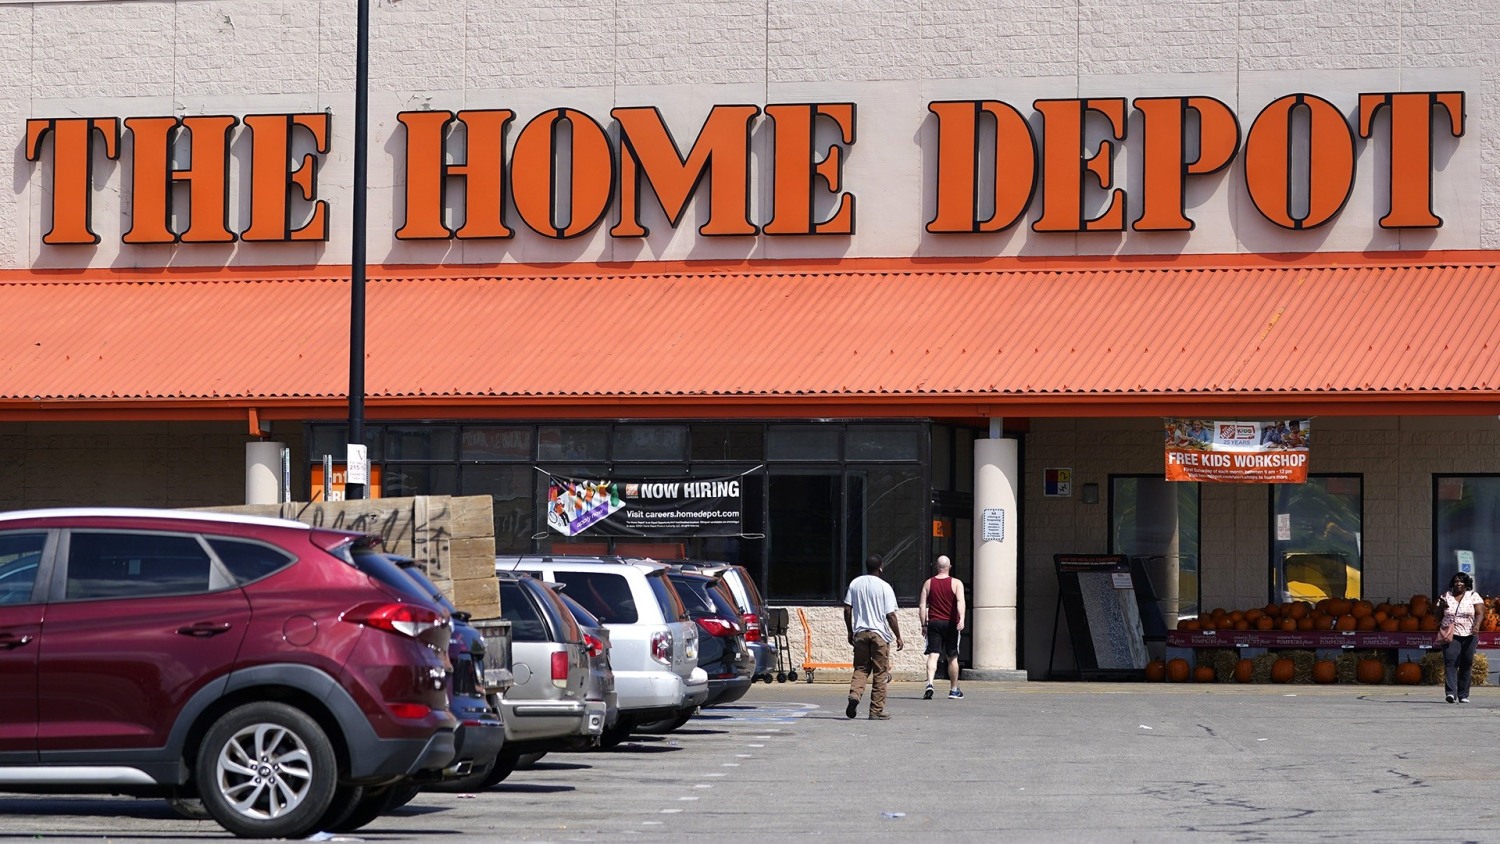 Home Depot to unveil new store in Monterey Park – Pasadena Star News